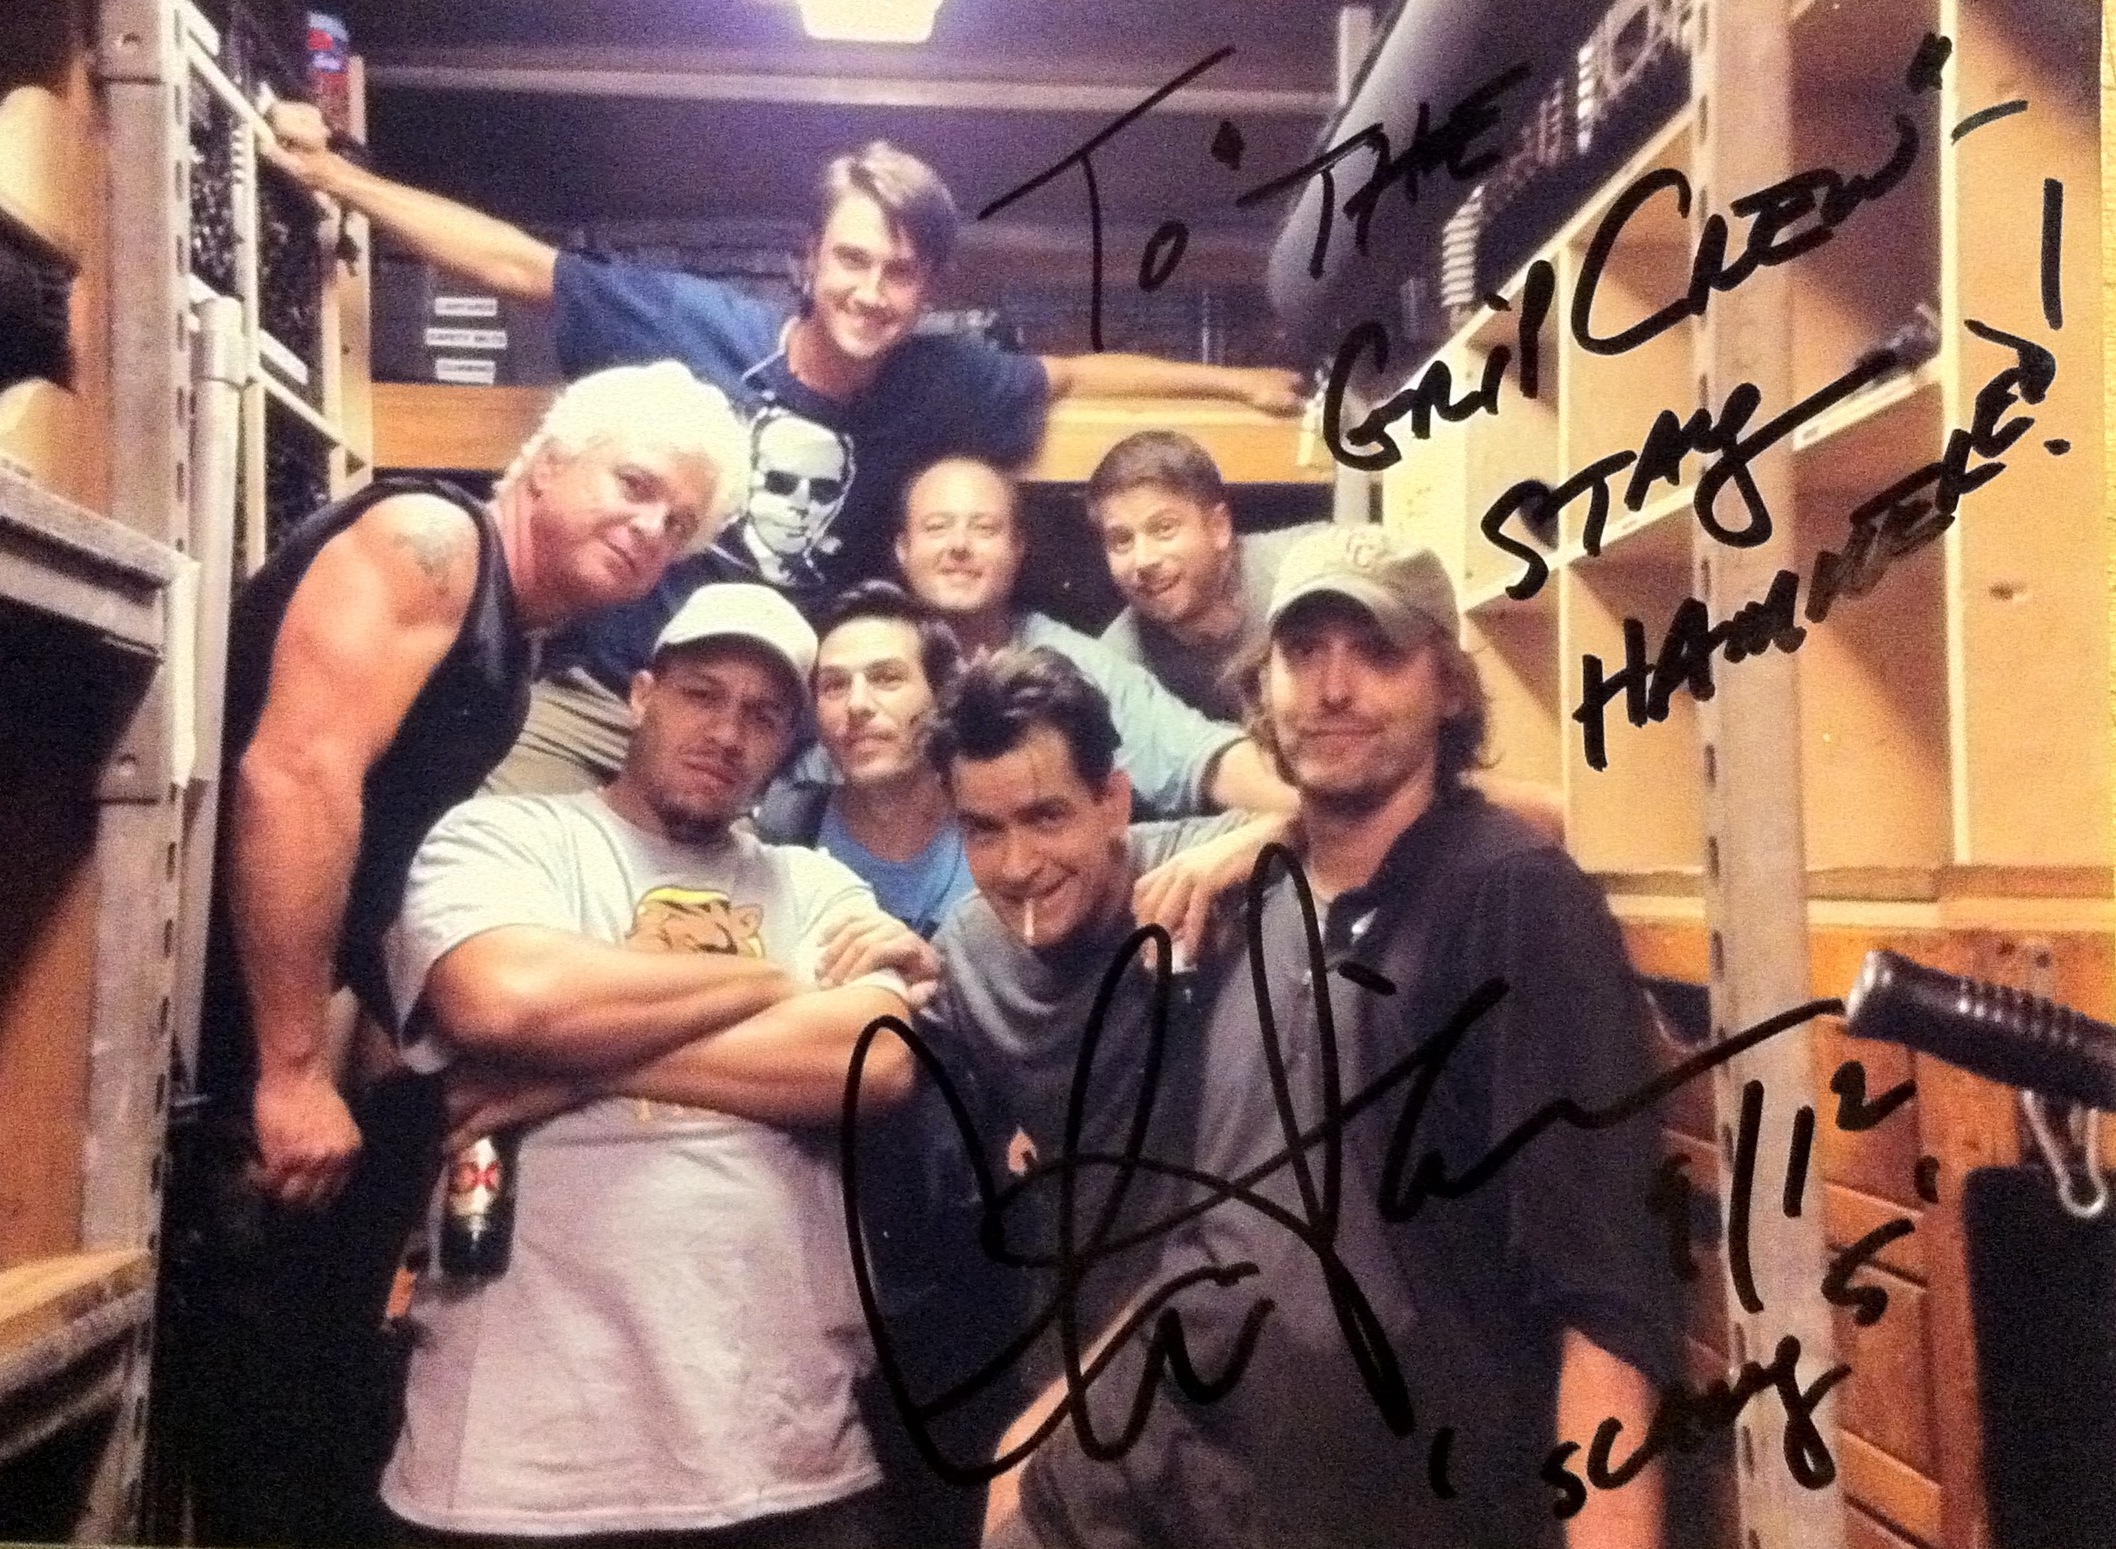 Grip Truck with The Grip Crew for Scary Movie 5 with Charlie Sheen. Super nice guy; had a great time with him. He hung out had a beer with us and took this pic printed it on the truck and he signed it the next day for me.